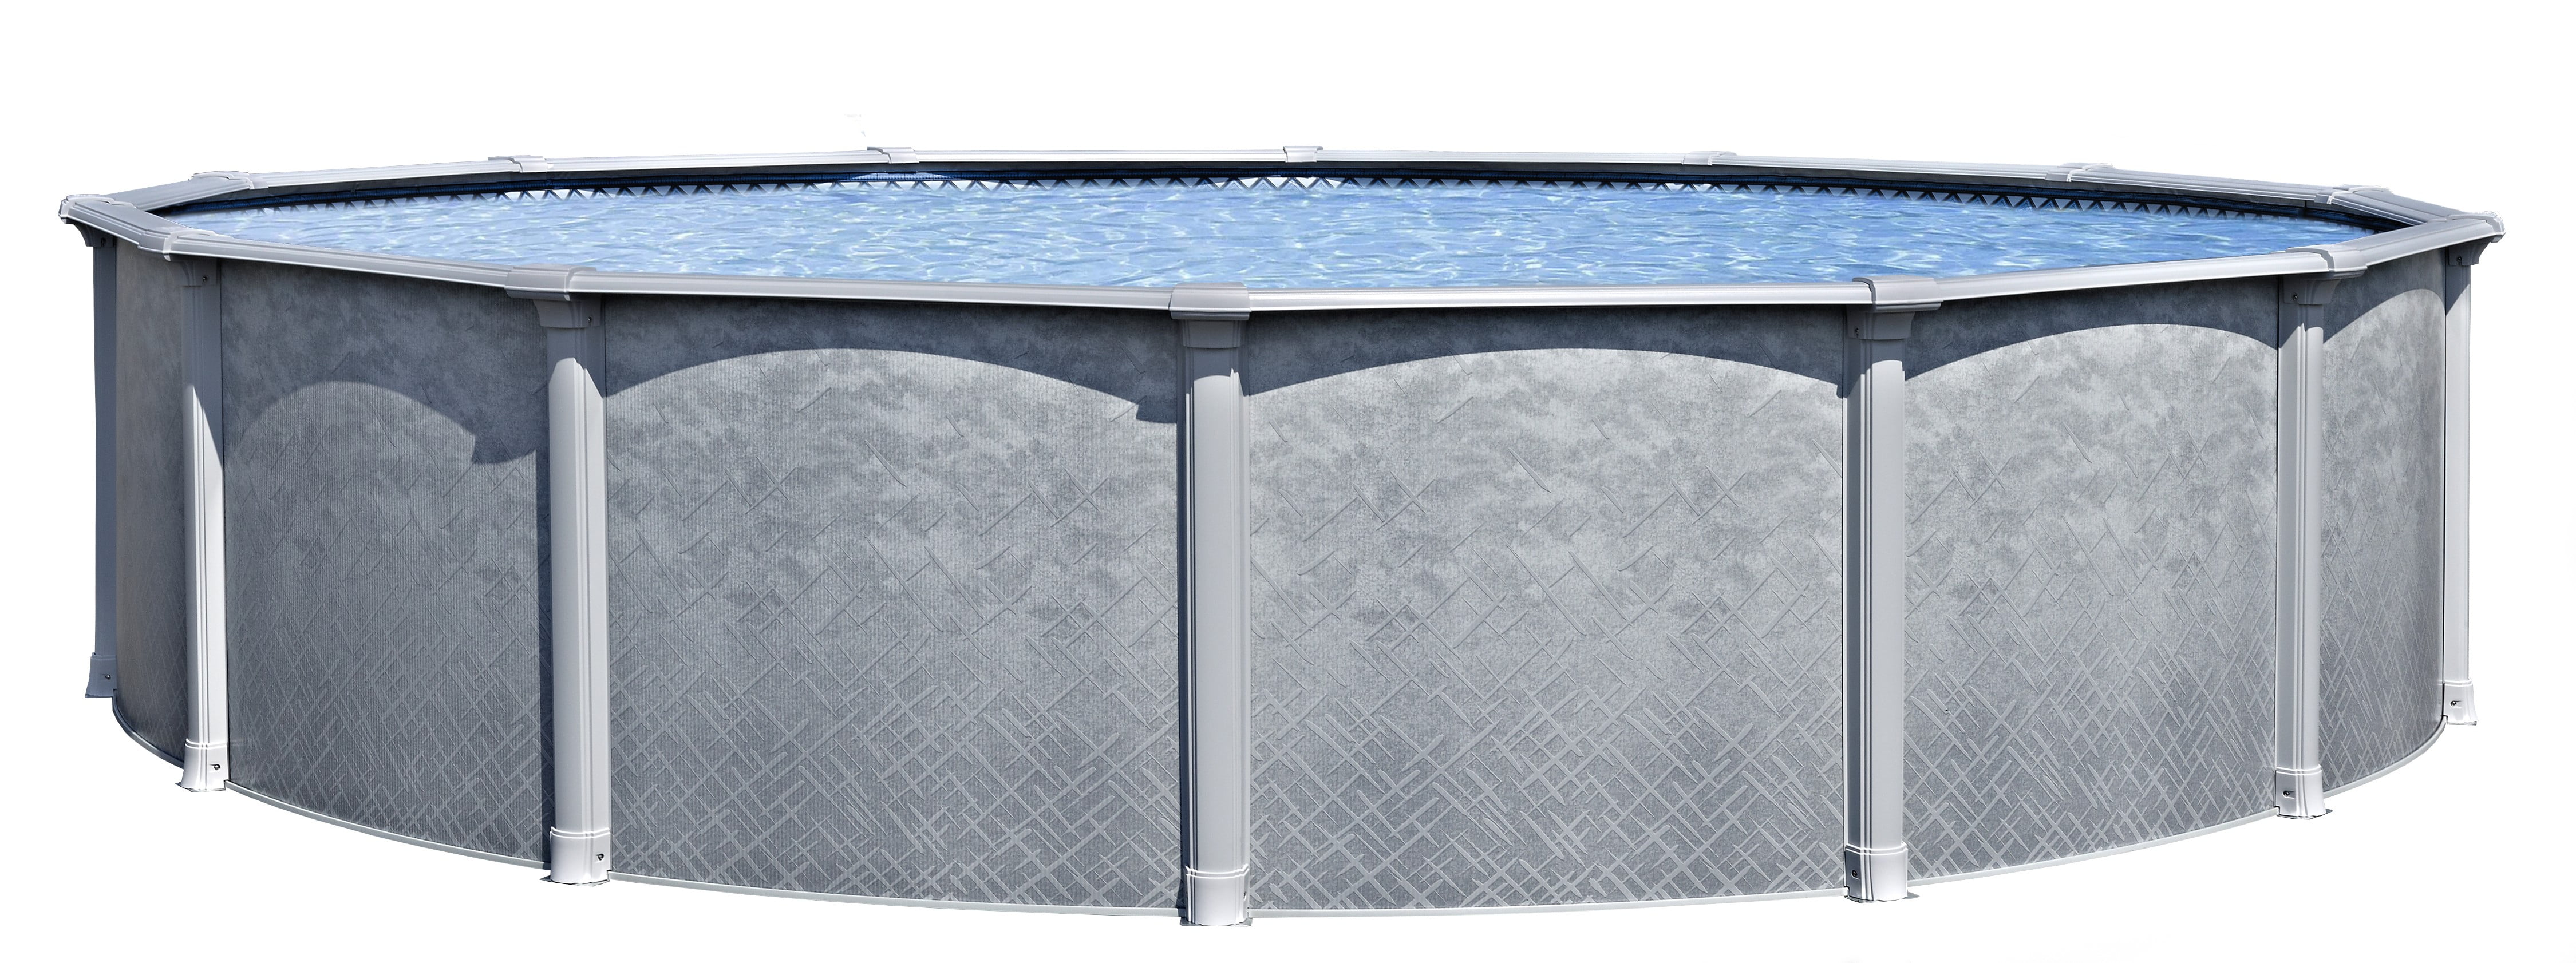 52-Inch Height Steel-Sided Walls 27' Round, Aqua Brook Bundle with 25 Gauge Overlap Liner & Widemouth Skimmer Lake Effect Above Ground Swimming Pools